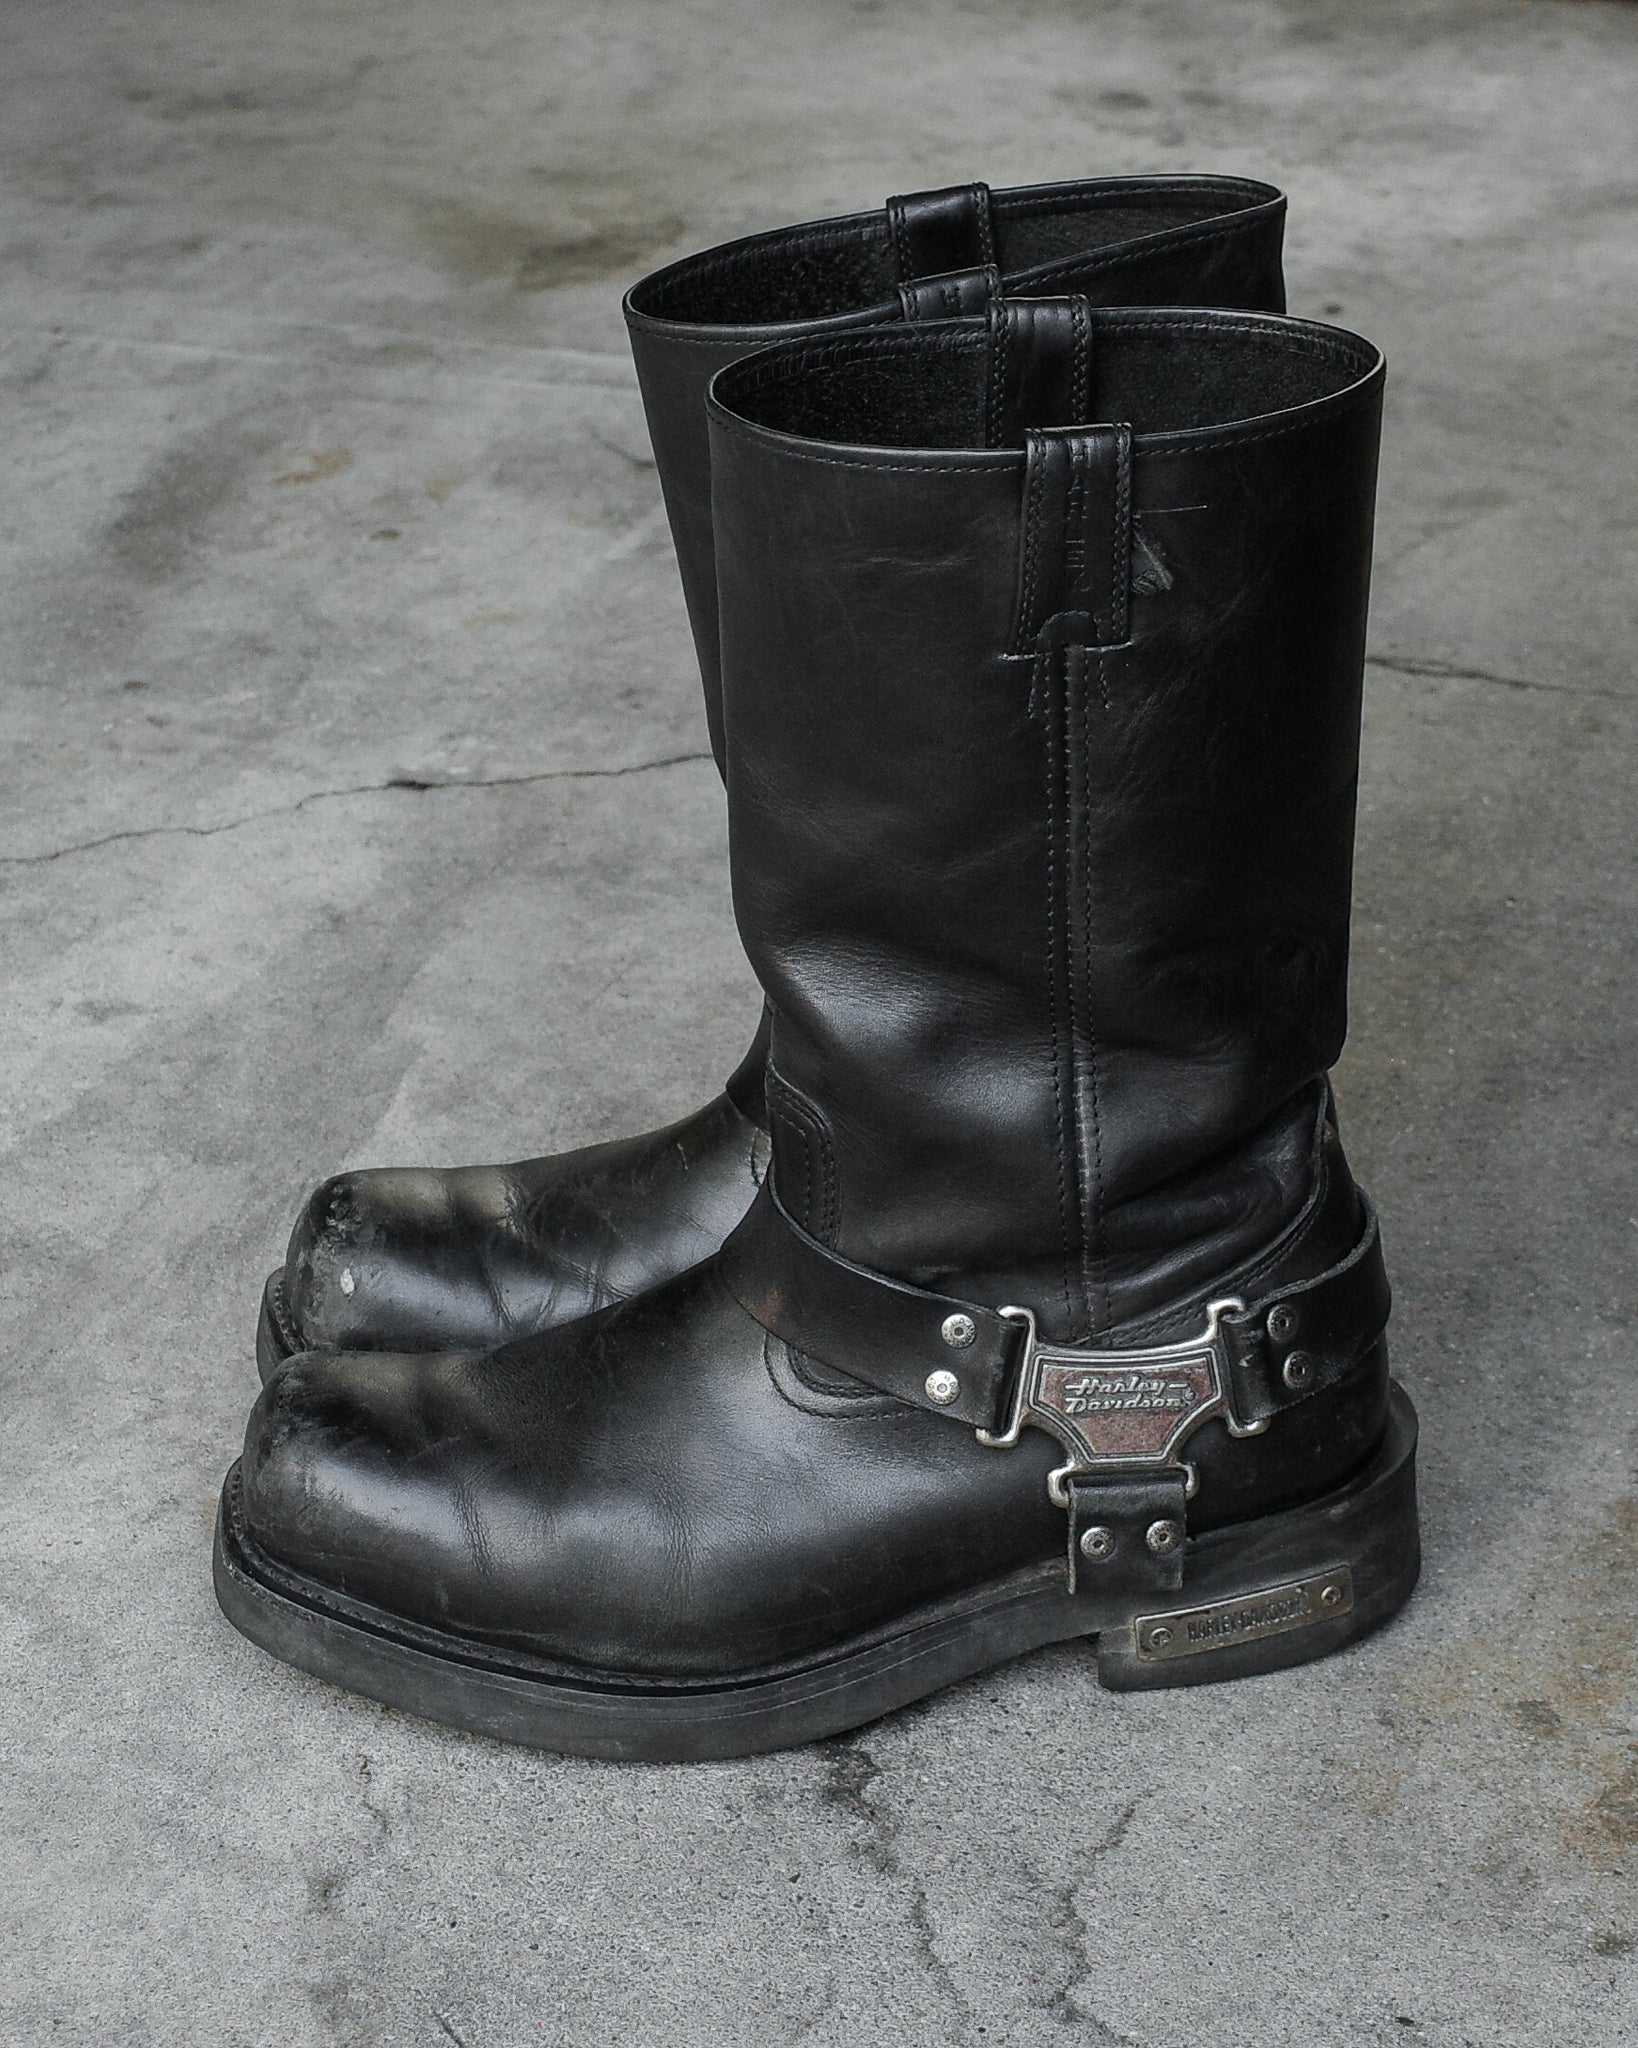 Early 2000s Harley Davidson Harness Boots